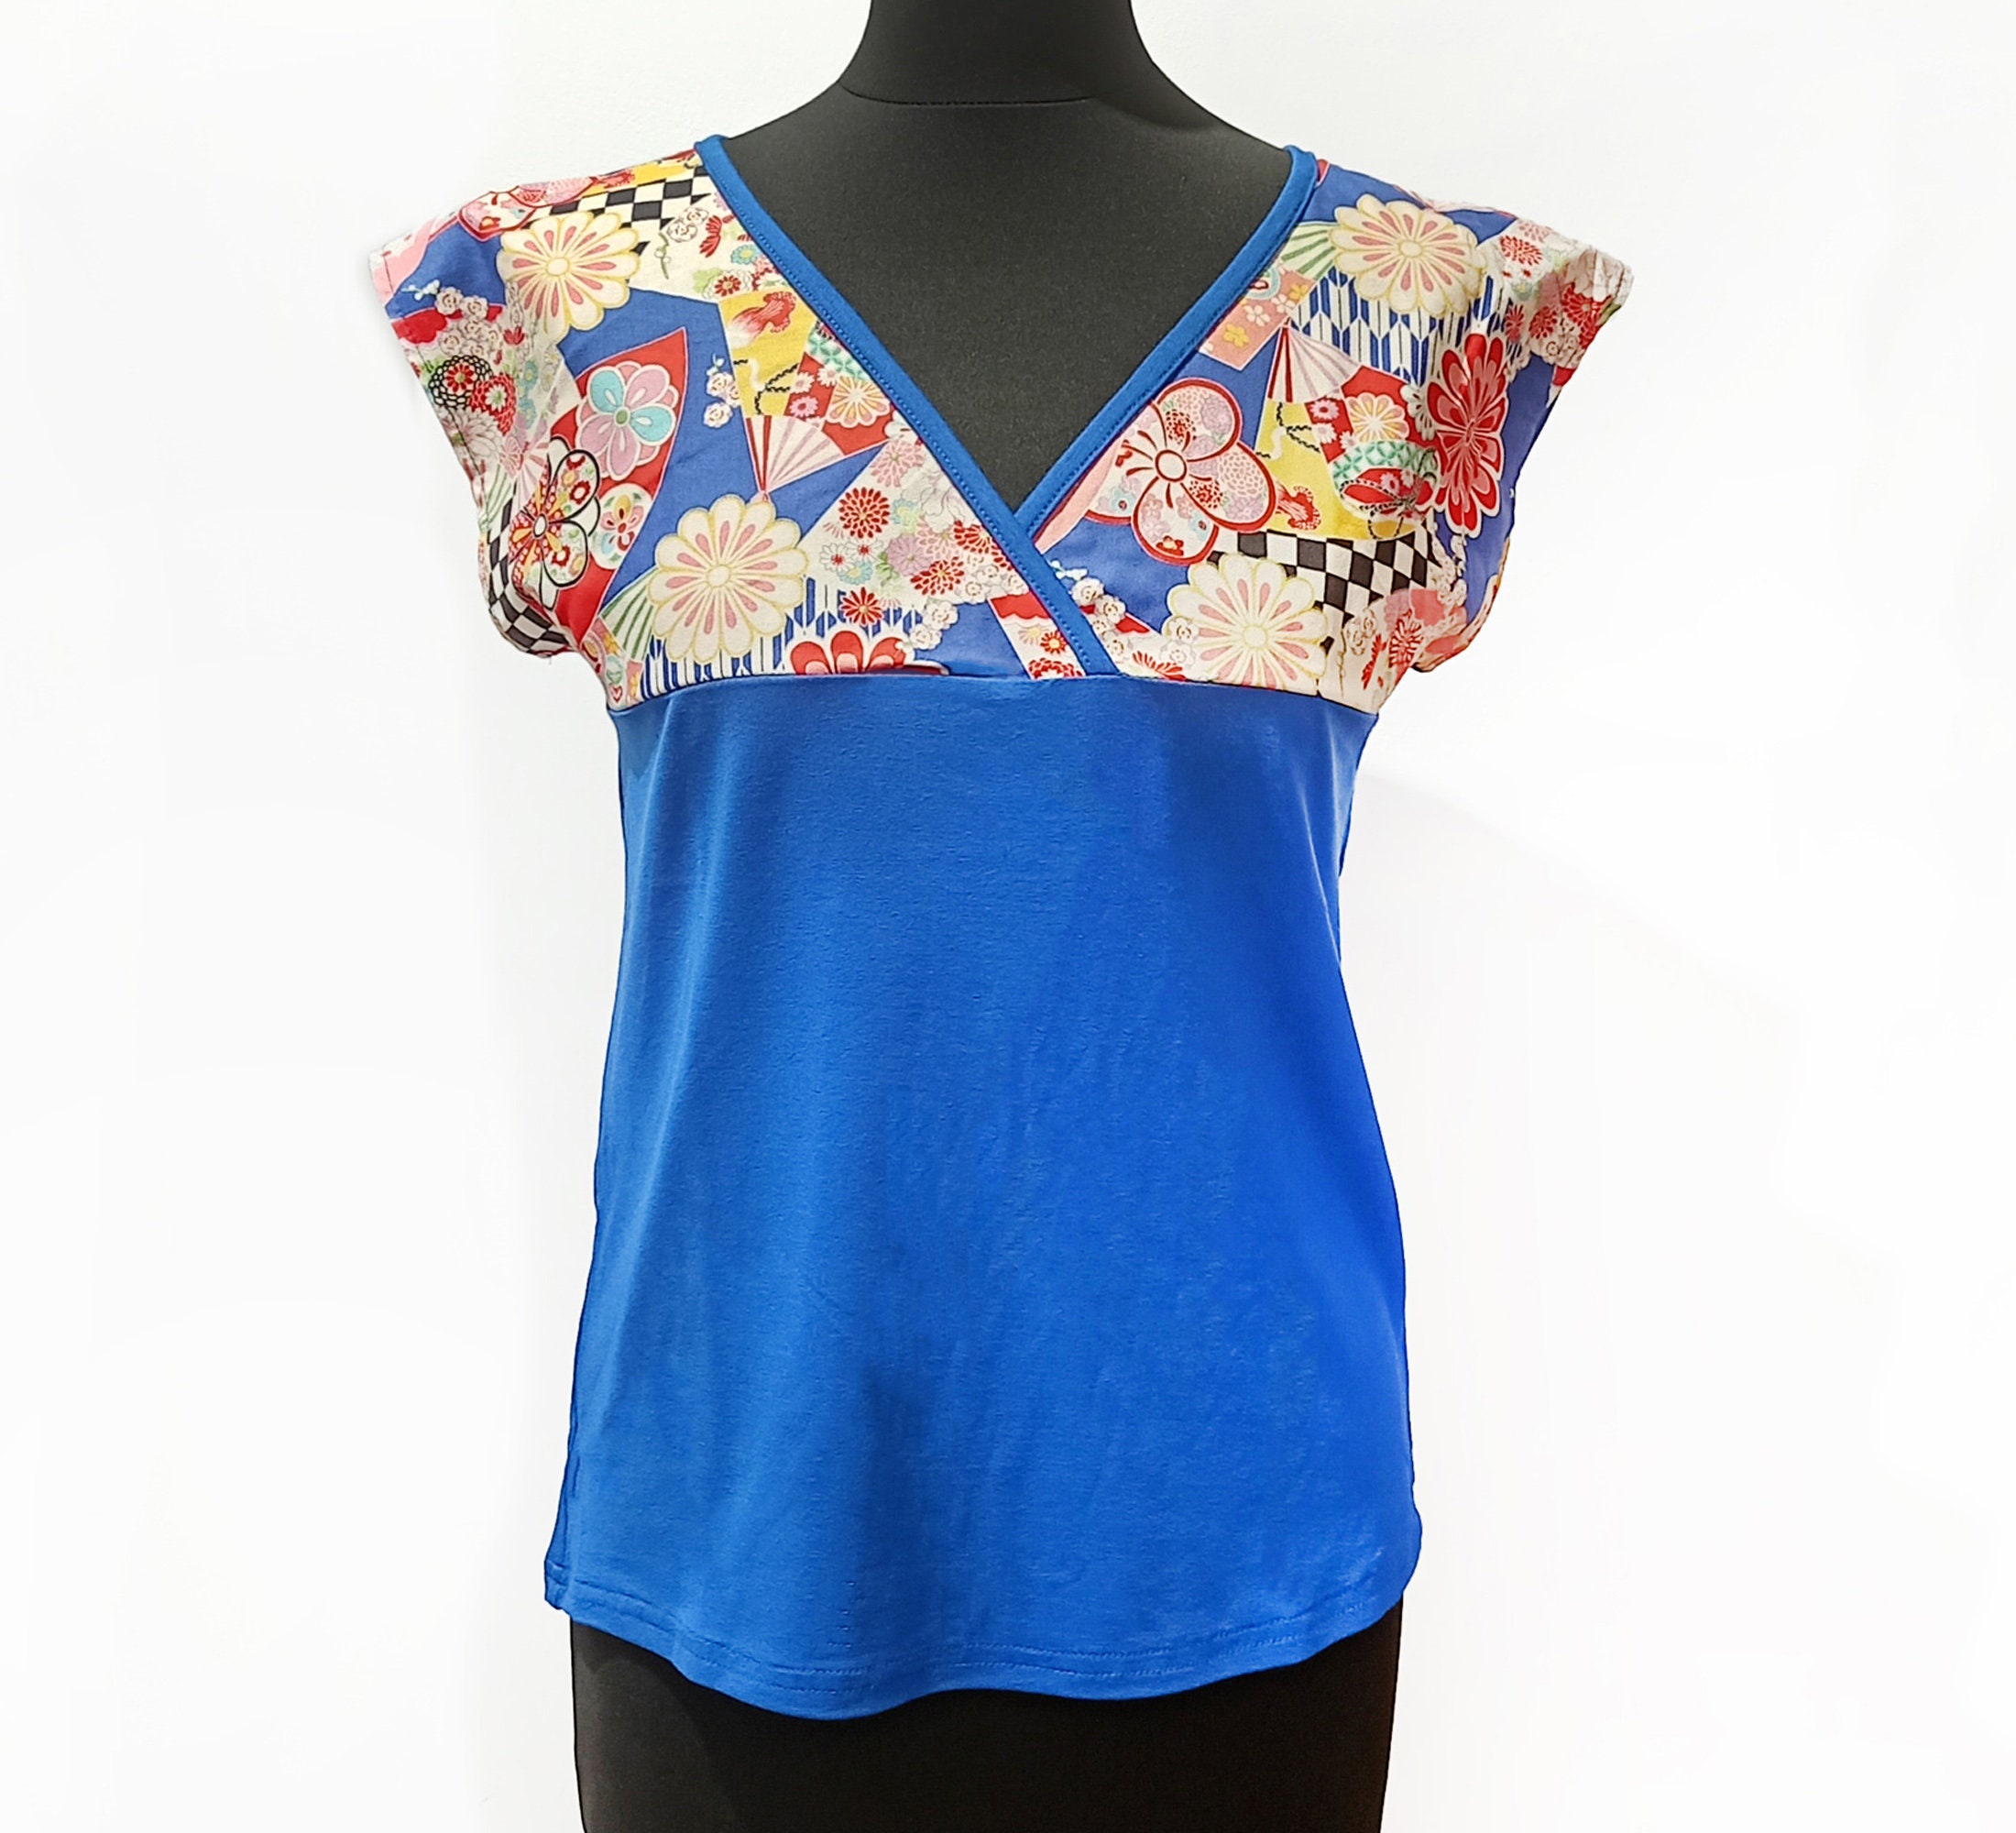 discount 96% Blue/Multicolored S WOMEN FASHION Shirts & T-shirts Embroidery NoName Shirt 